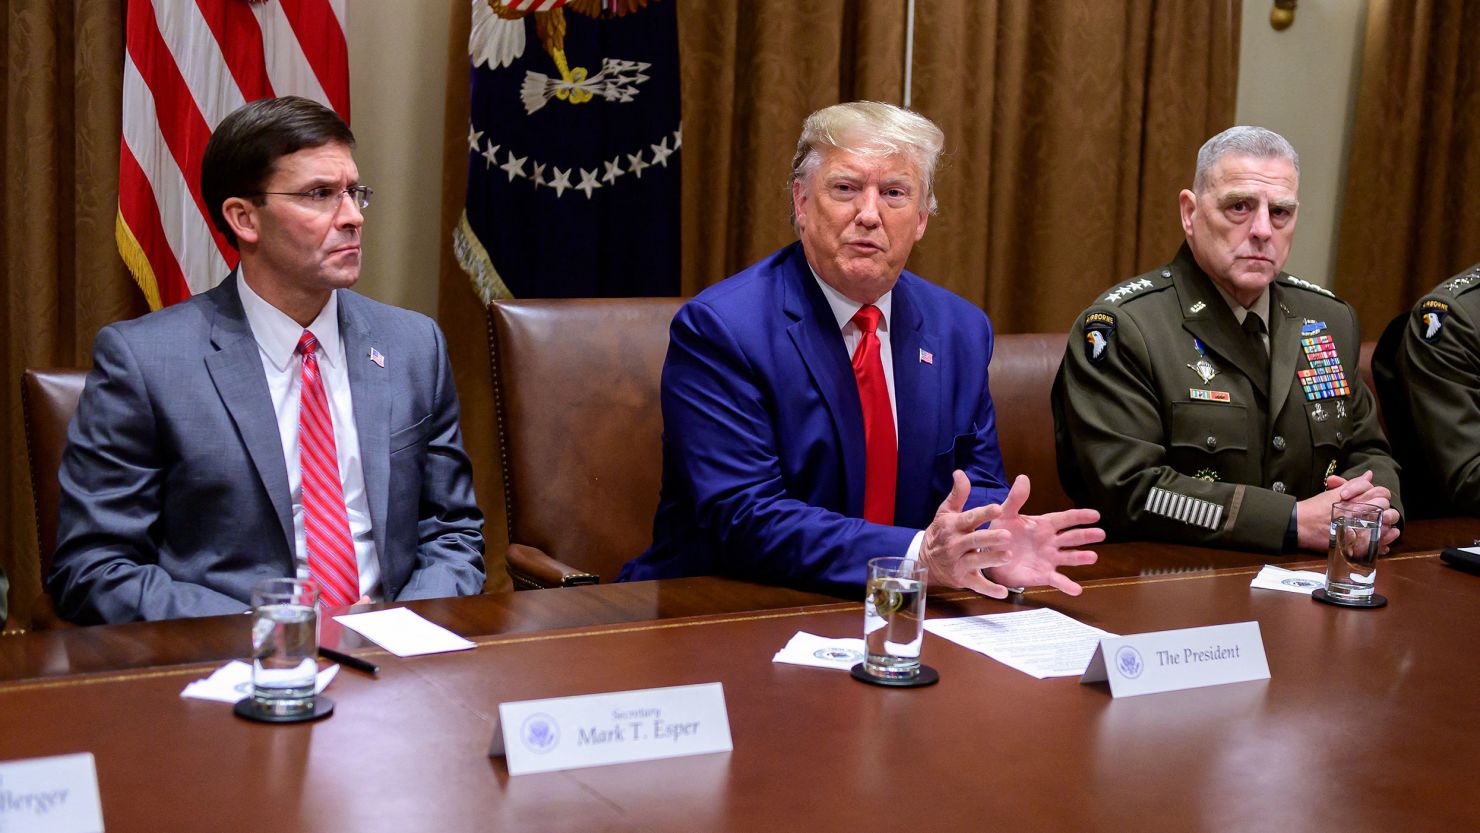 Then-President Donald J. Trump answers a reporter's question as he participates in a briefing with senior military leaders in the Cabinet Room of the White House in Washington, DC, on October 7, 2019. 